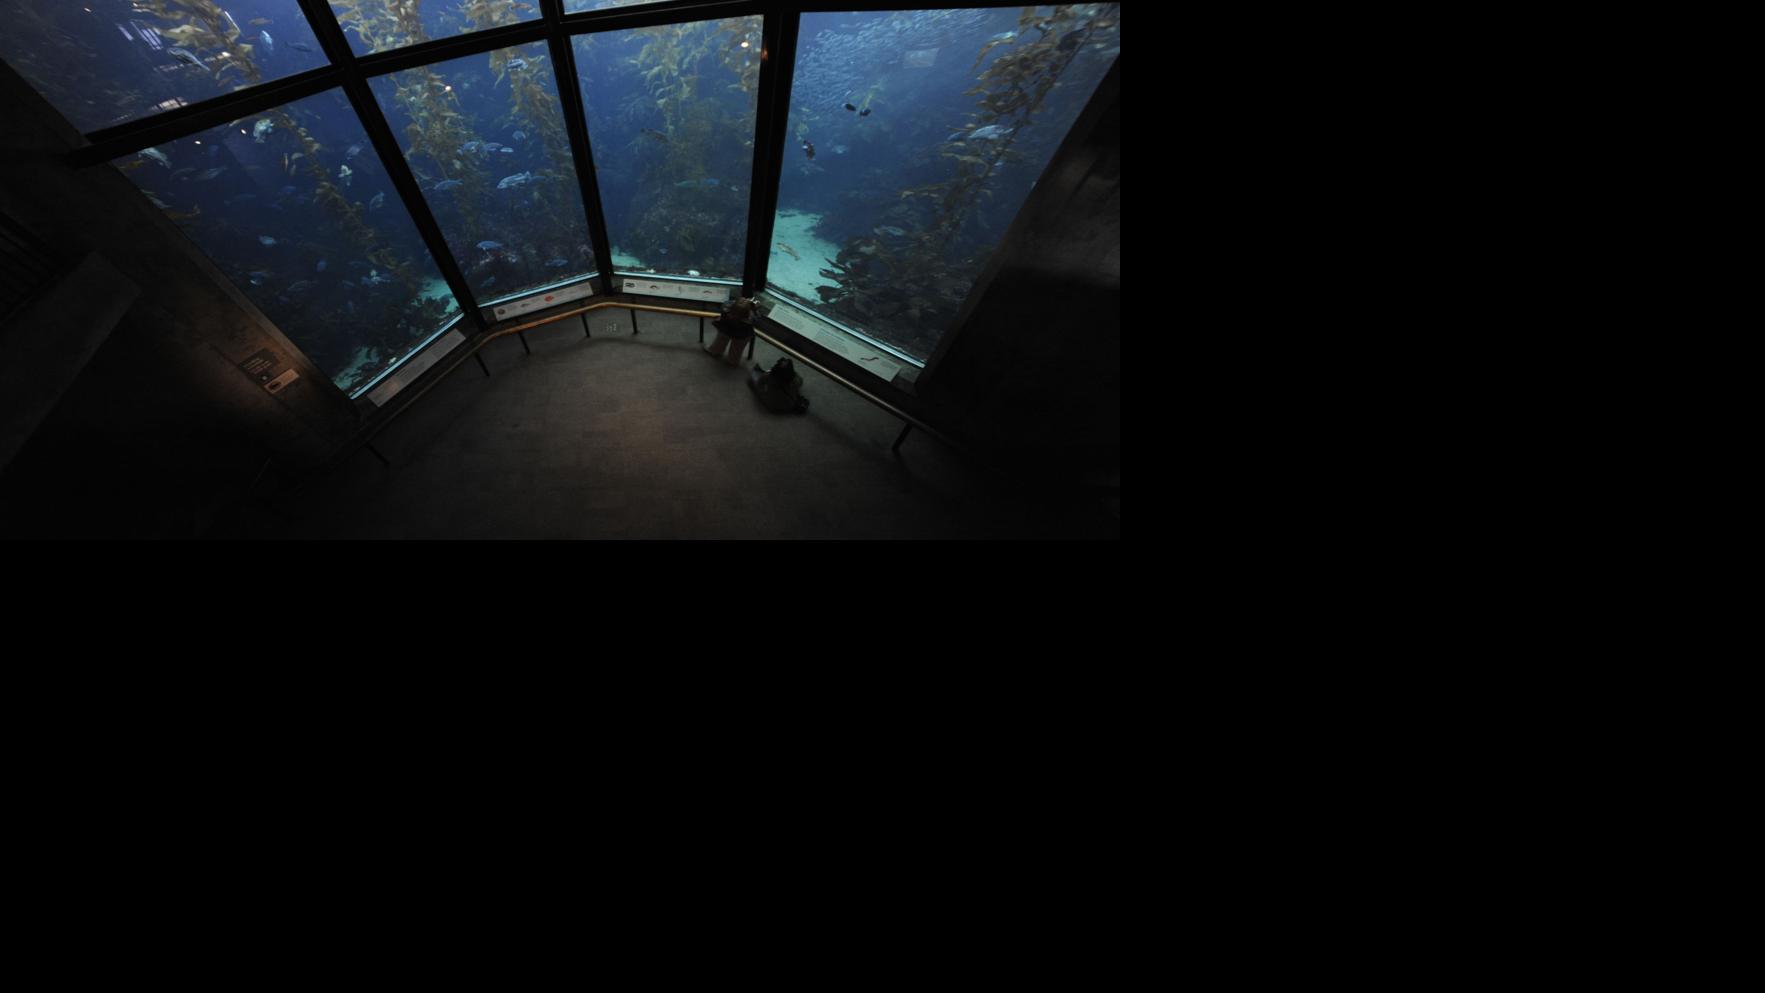 Monterey Bay Aquarium reopening to the public on July 13. - 5Da7a1be21105.image